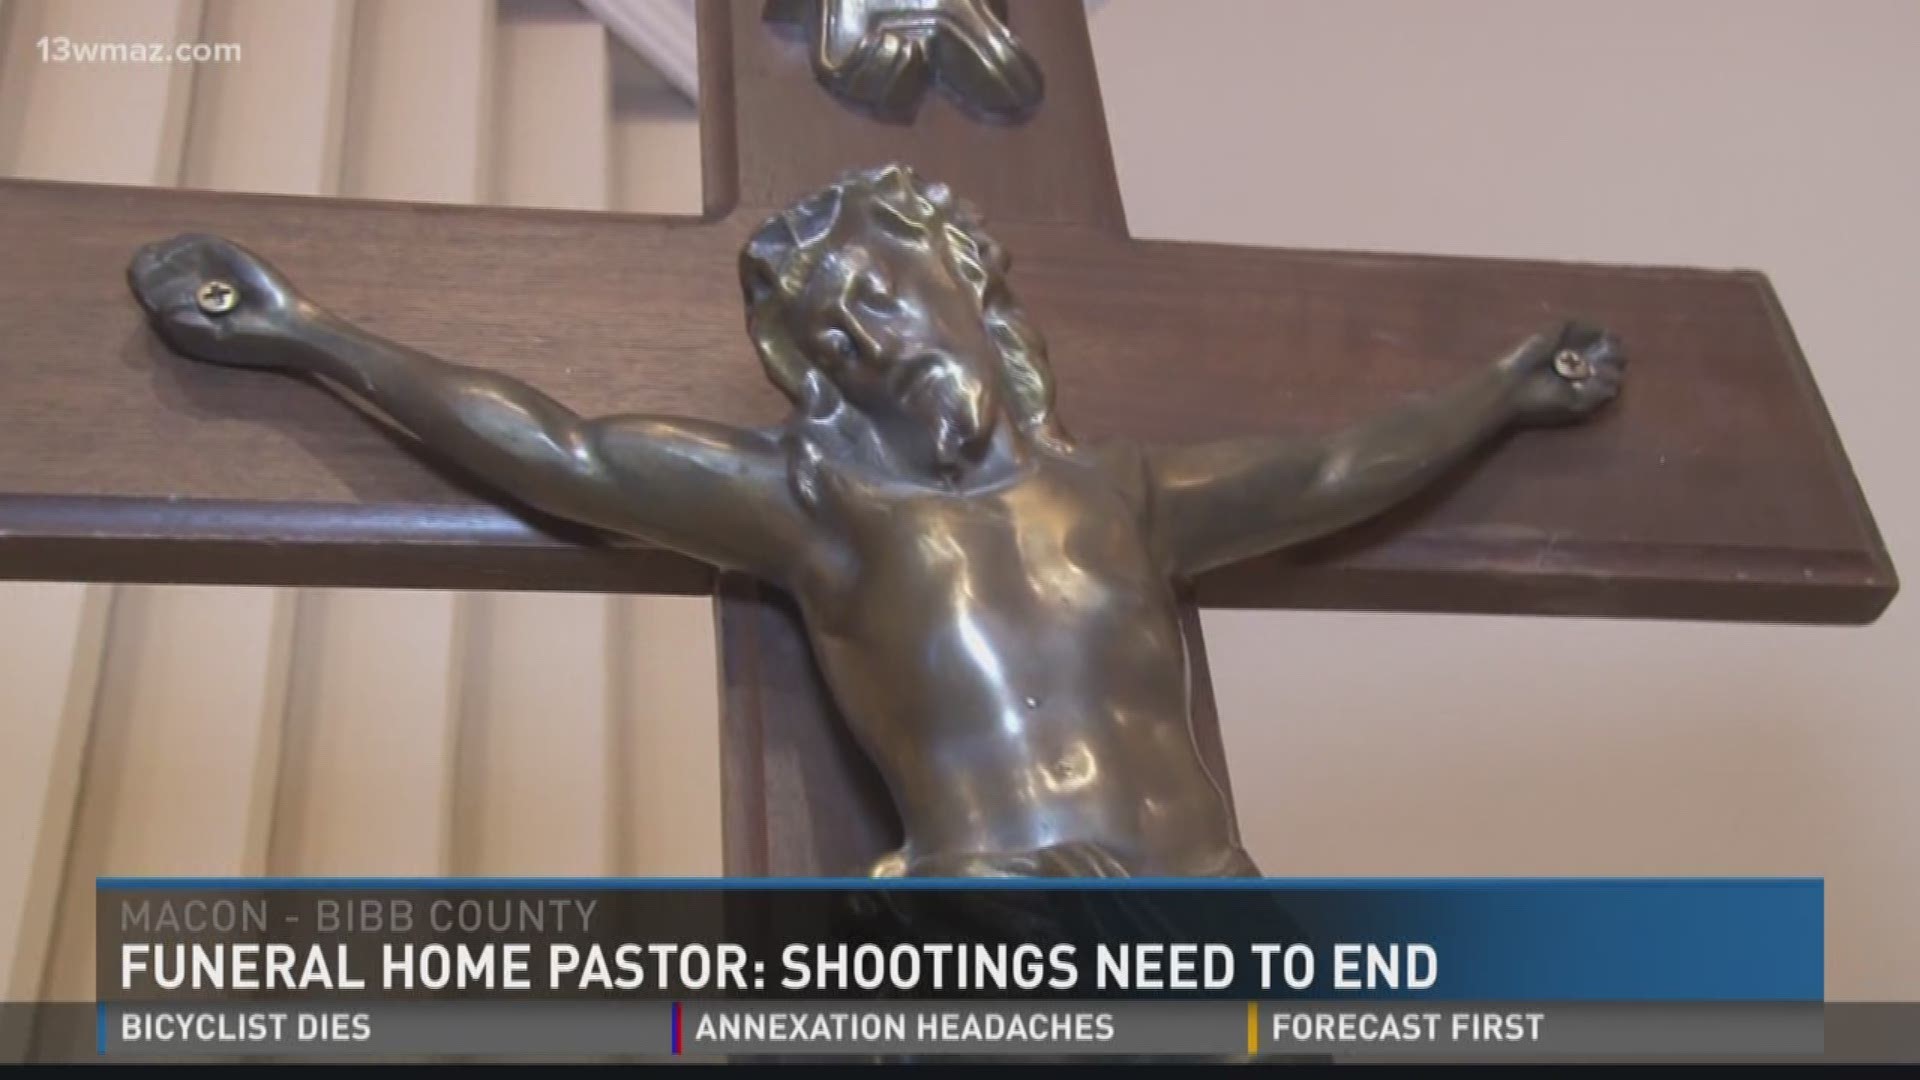 Funeral home pastor: Shootings need to end